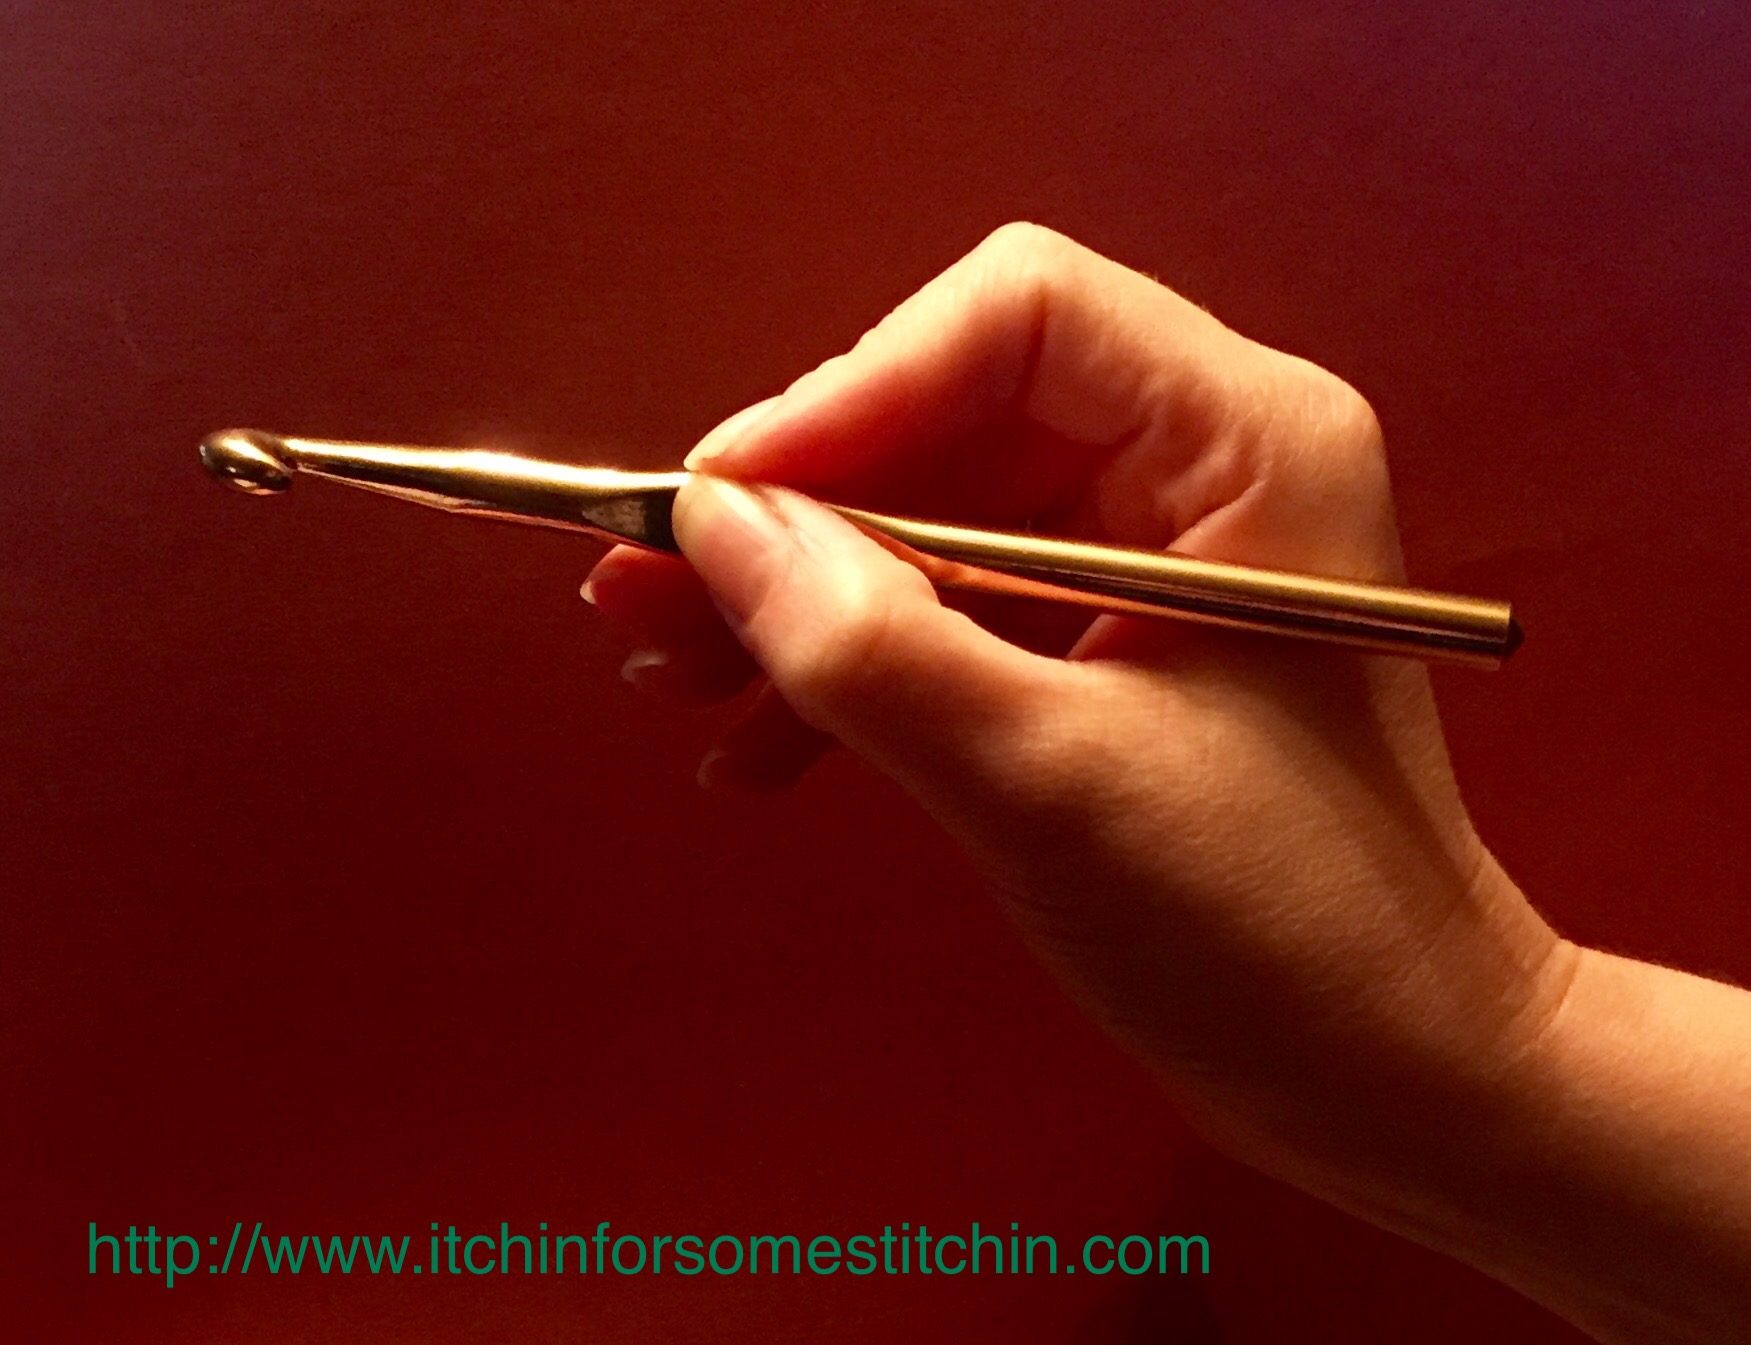 How to Hold a Crochet Hook - The Pencil Position by https://www.itchinforsomestitchin.com